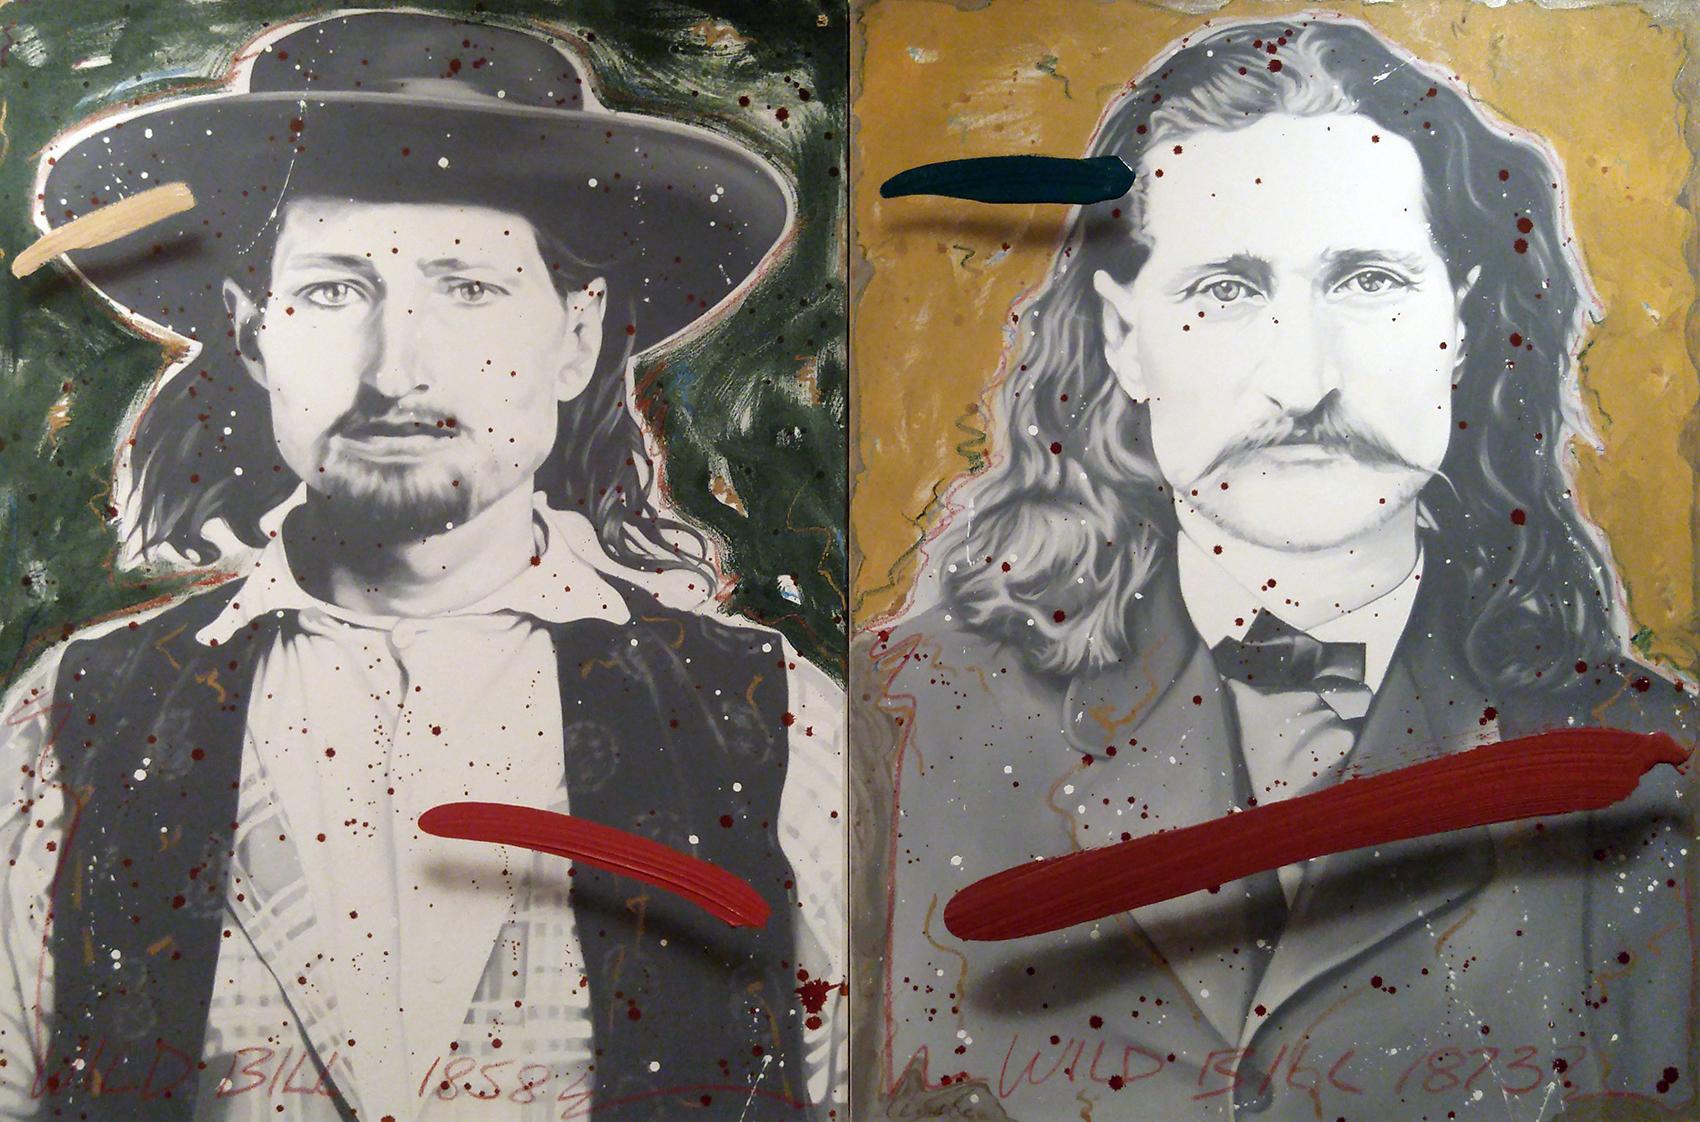 Ceravolo Figurative Painting - "Wild Bill Hickok" Large Old West Yellowstone cowboy style oil on canvas 53x80"